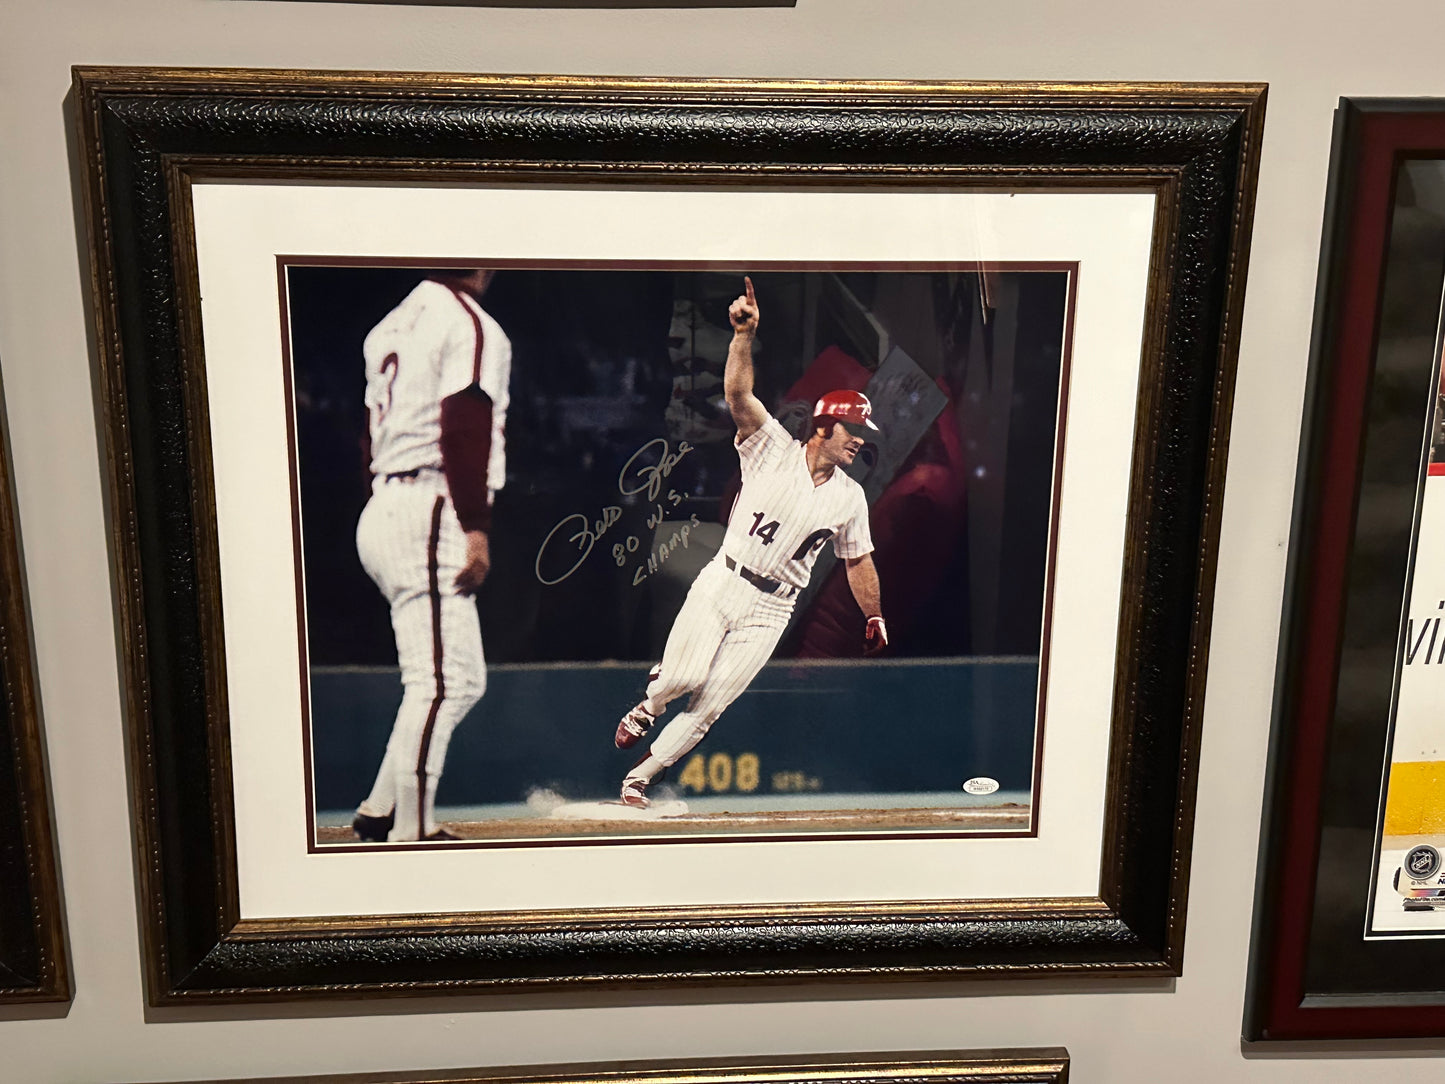 Pete Rose Signed 16x20 Framed Photo Phillies "80 WS Champs" JSA